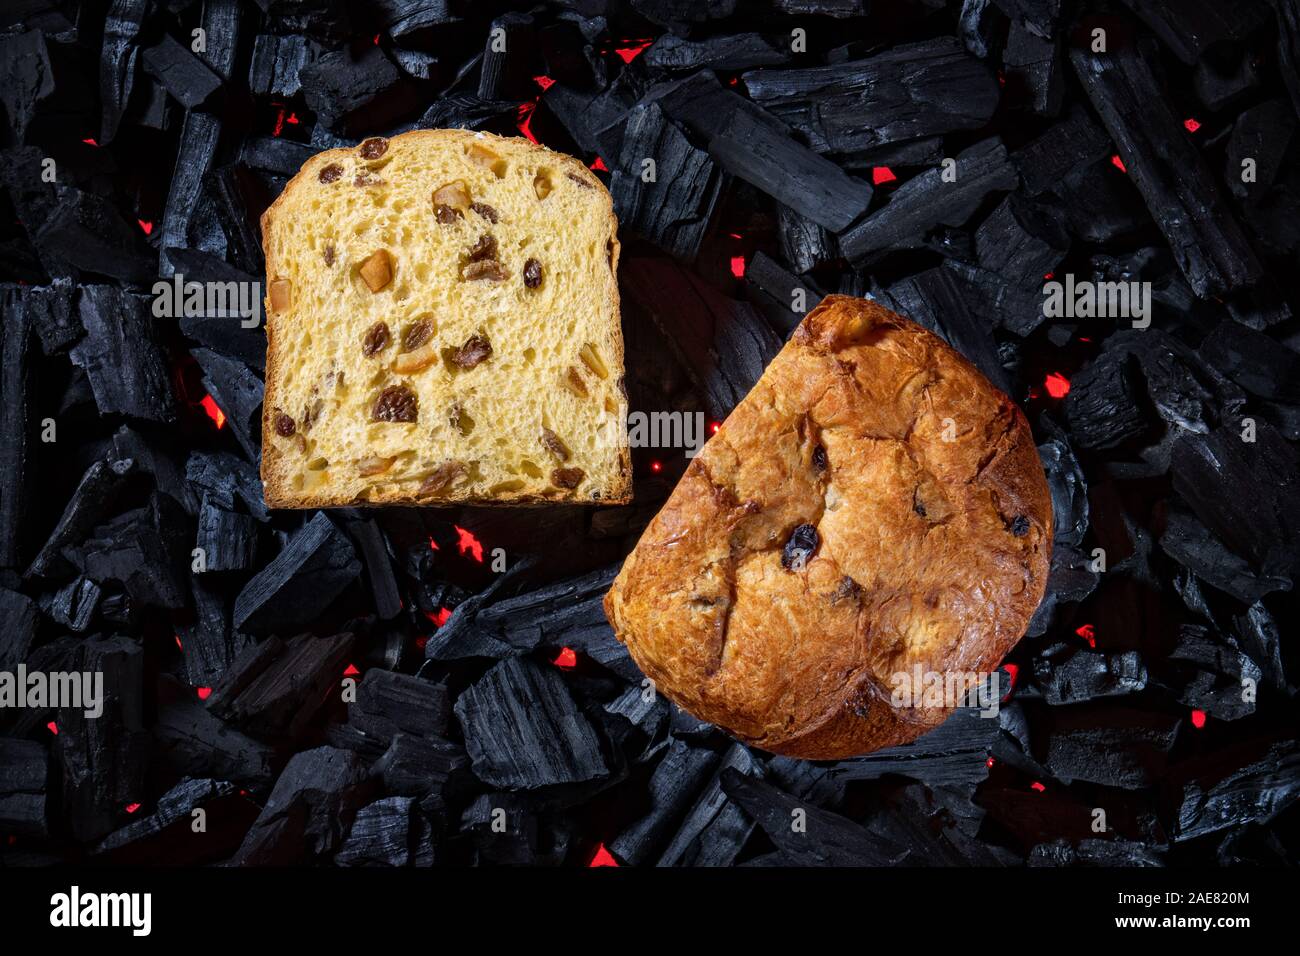 Sliced panettone placed on black charcoal background illuminated below with red light Stock Photo